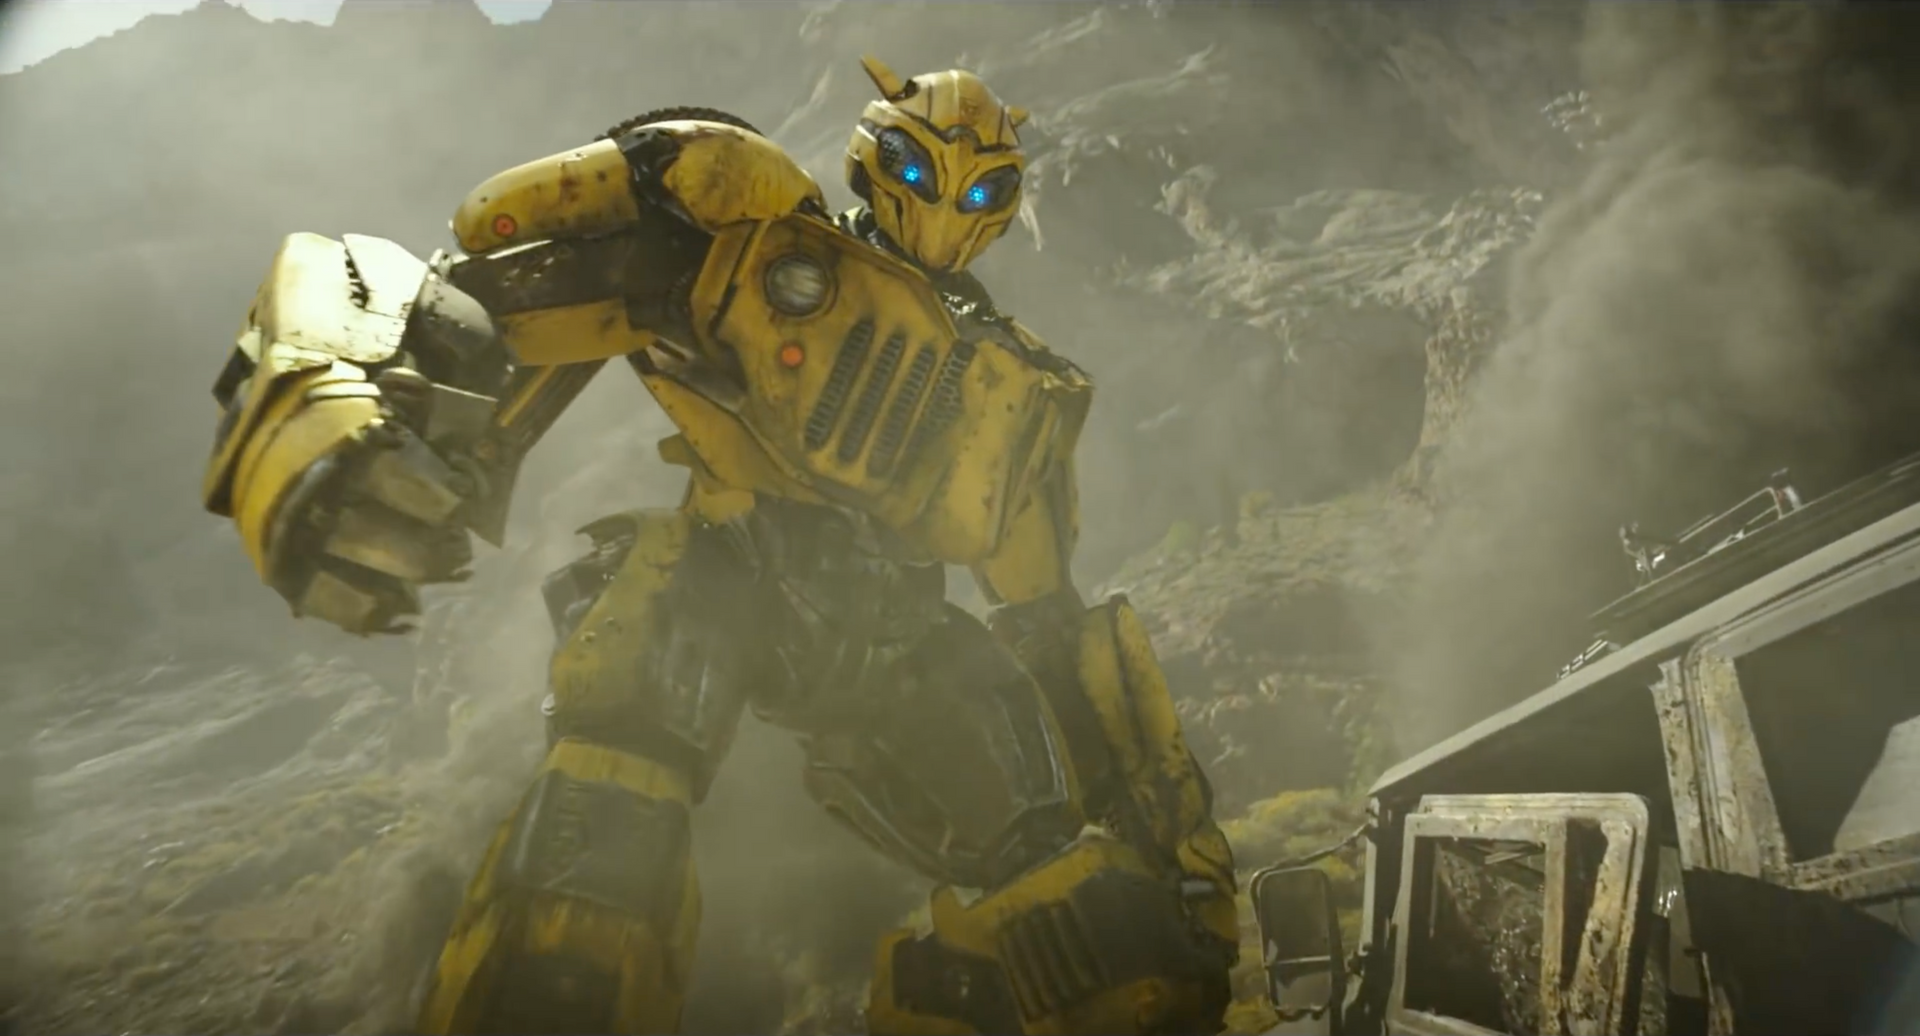 Bumblebee Transformers Spin-off Trailer